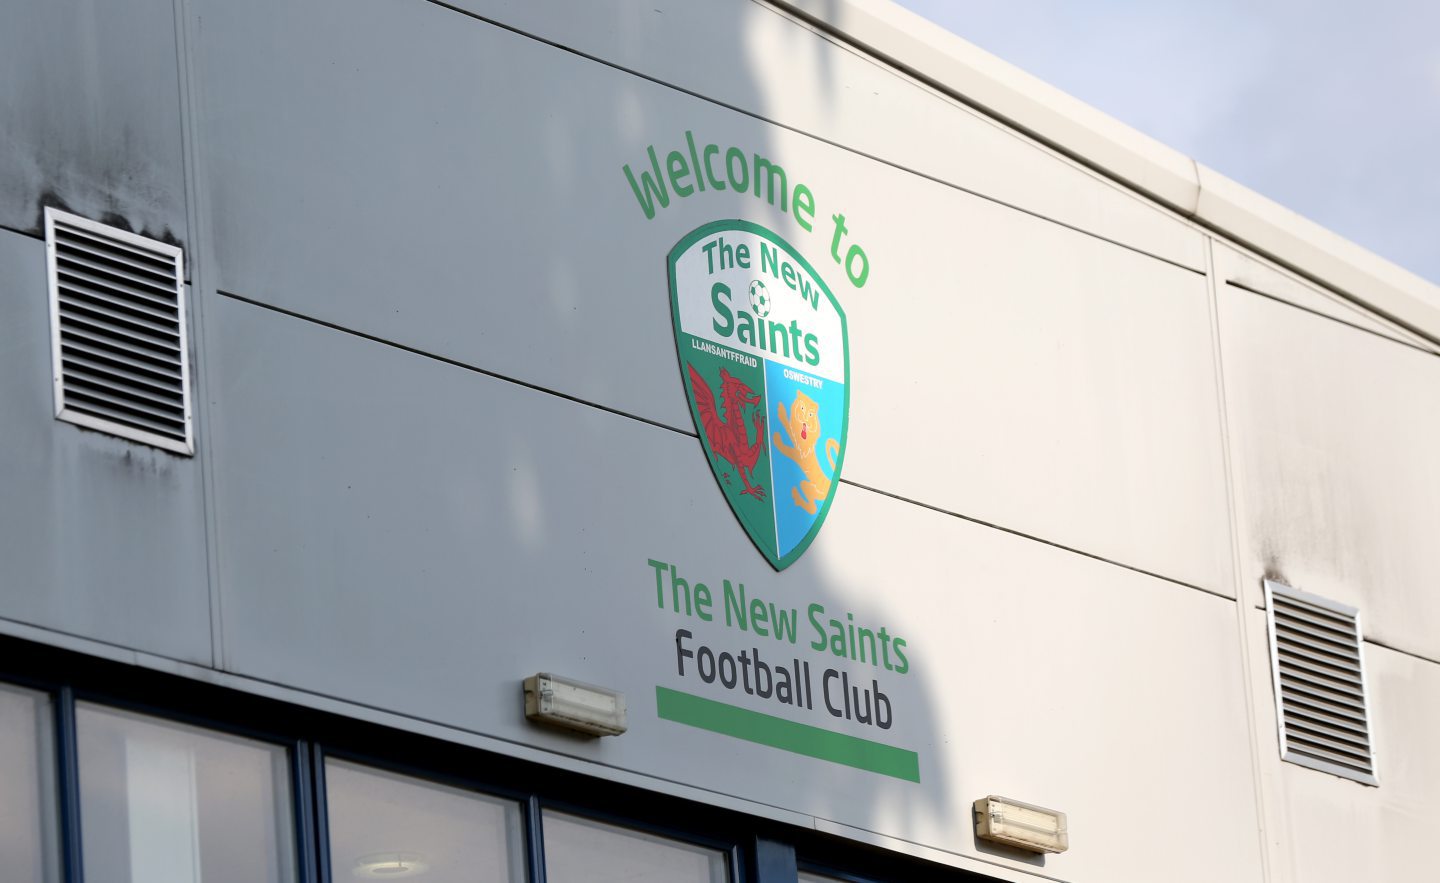 The New Saints will be an entirely new opposition for Dundee